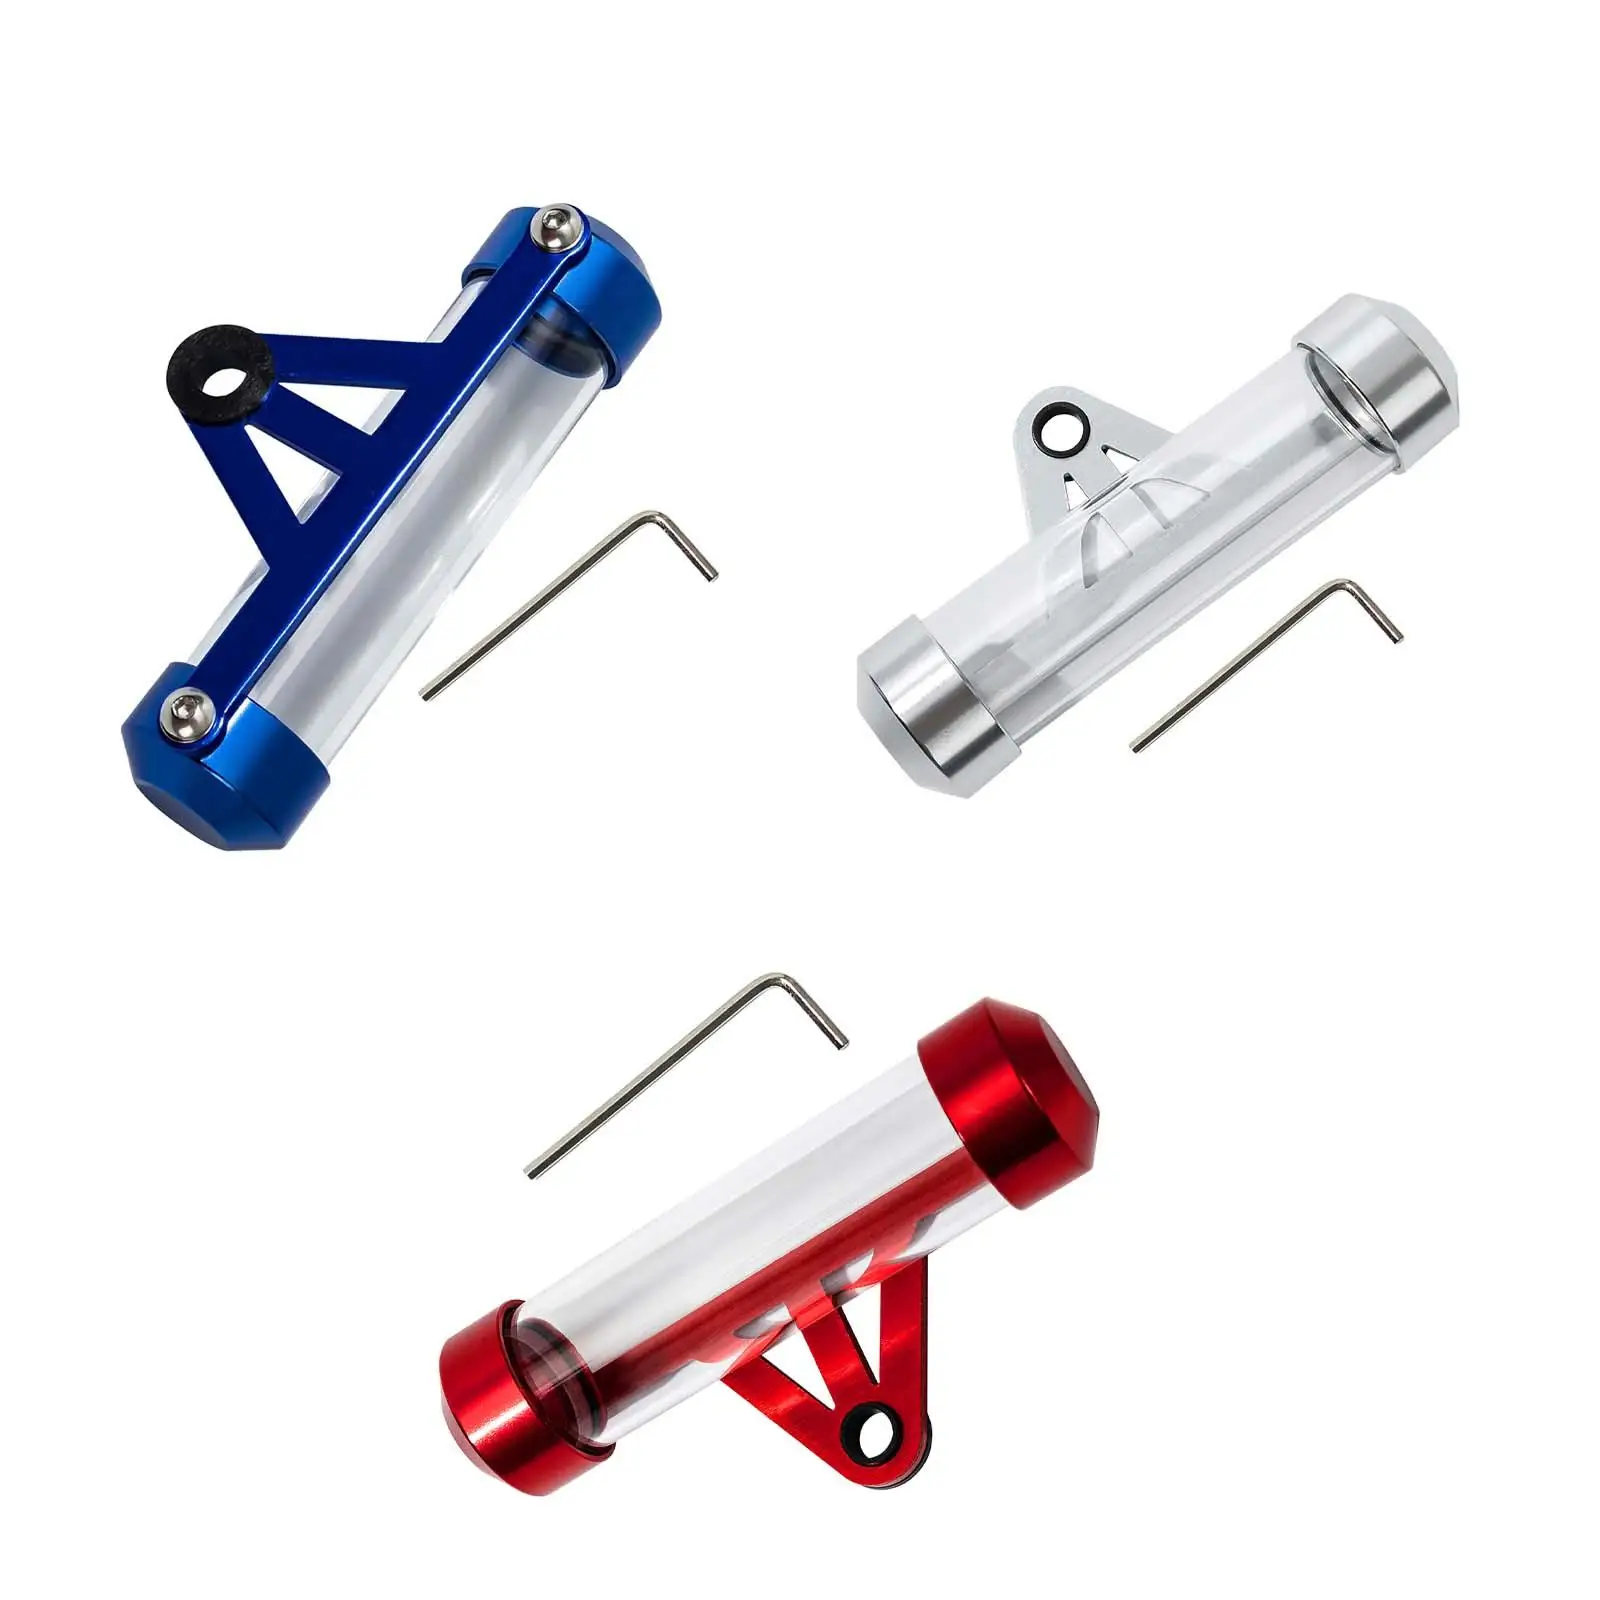 Universal Motorcycle Secure Tax Tube Holder Made of Aluminium Alloy and Glass Pratical Multifunctional Motorbike Accessories